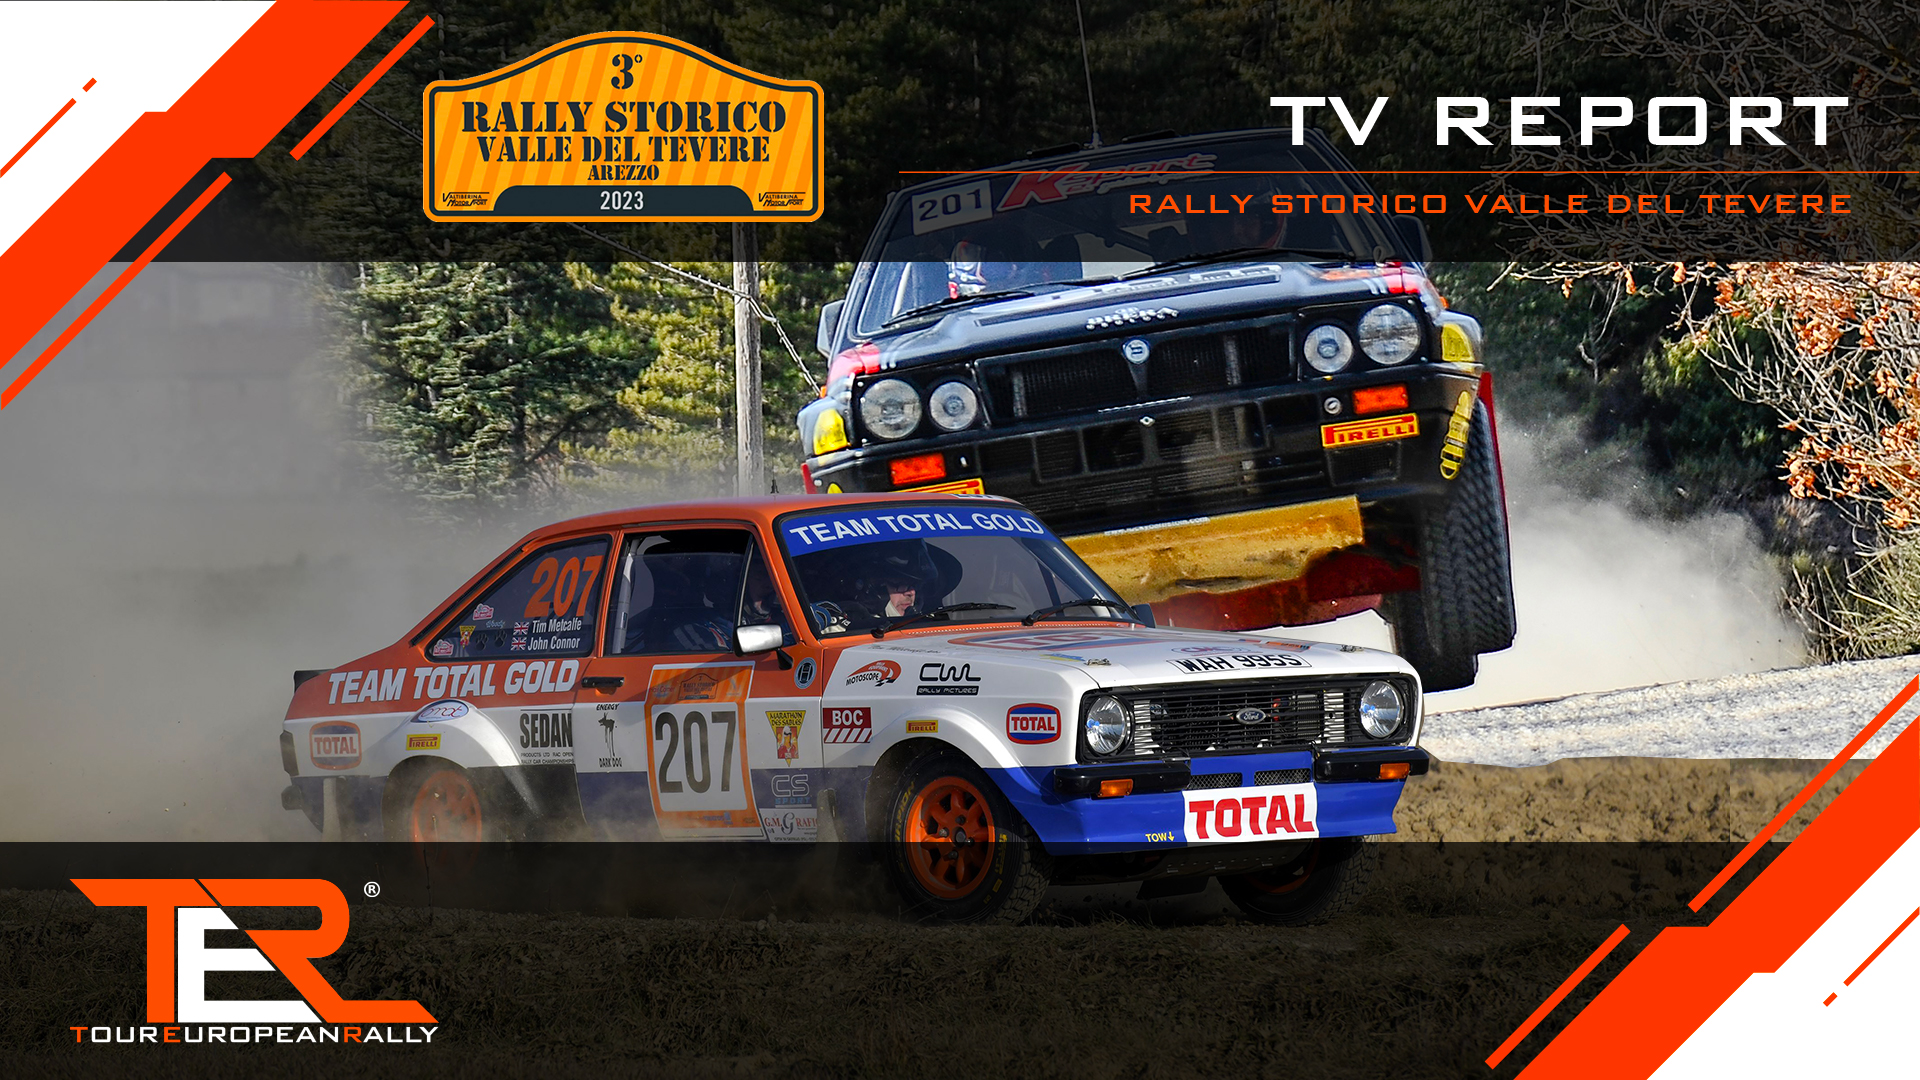 2023 TER HISTORIC - Rally Storico Valle del ......